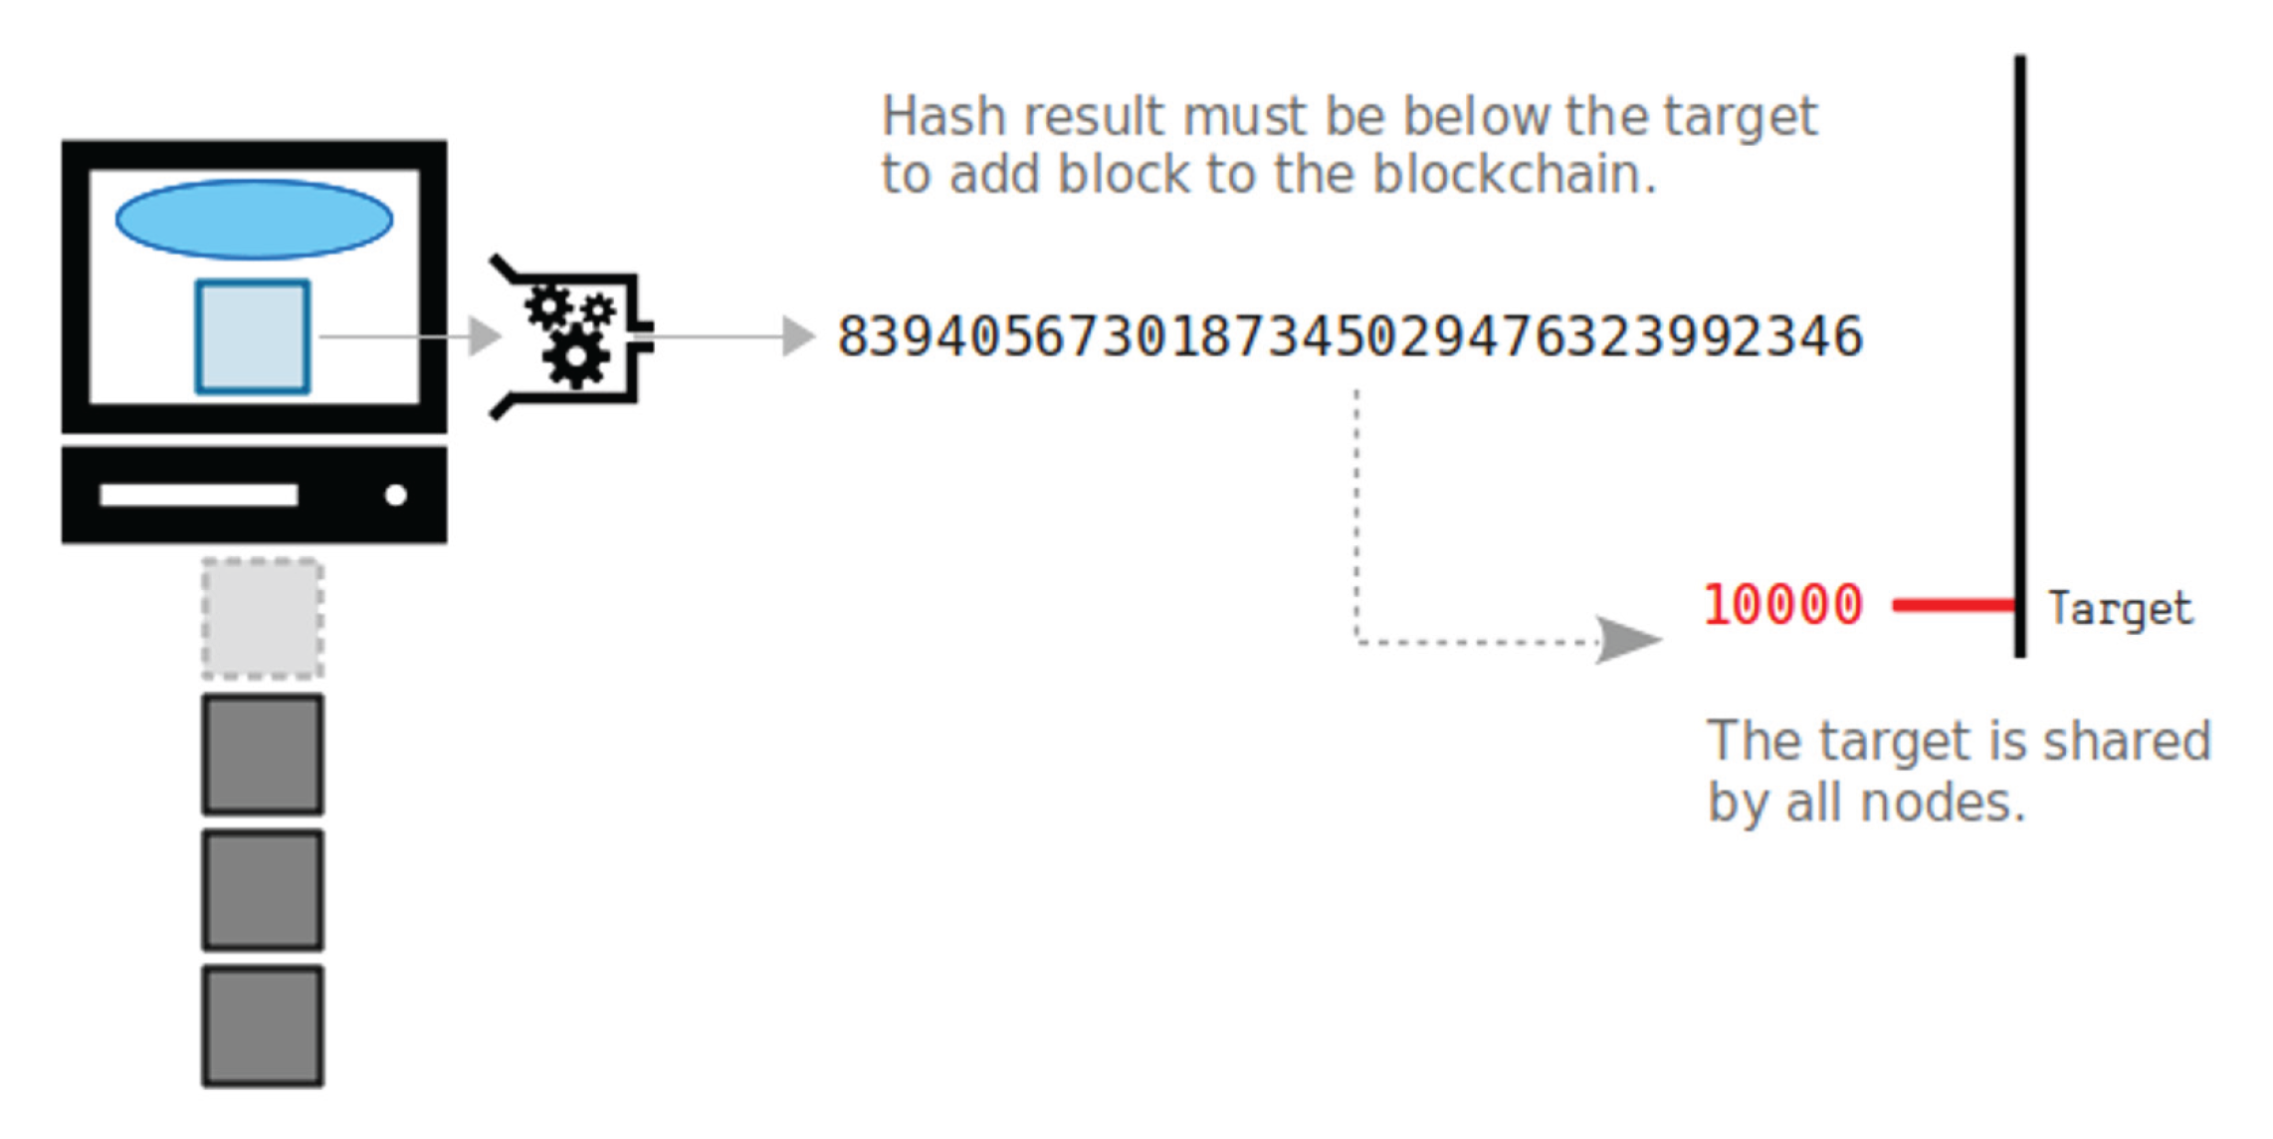 39.Hash-result-and-the-target-v1.png